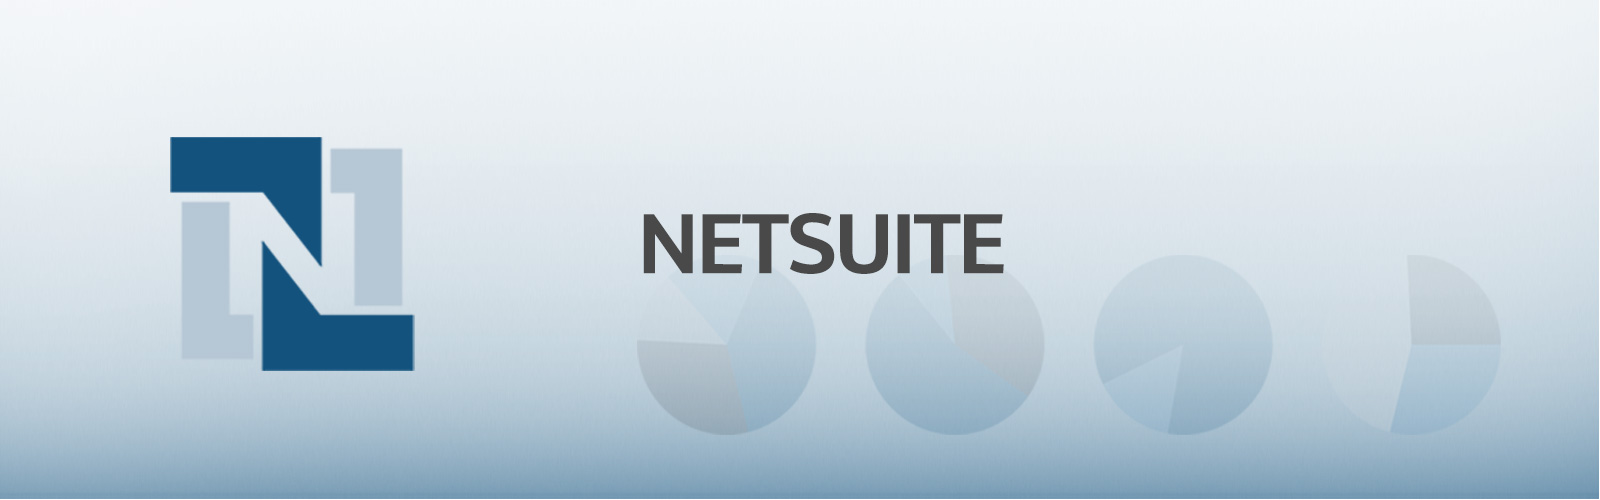 Netsuite Services banner